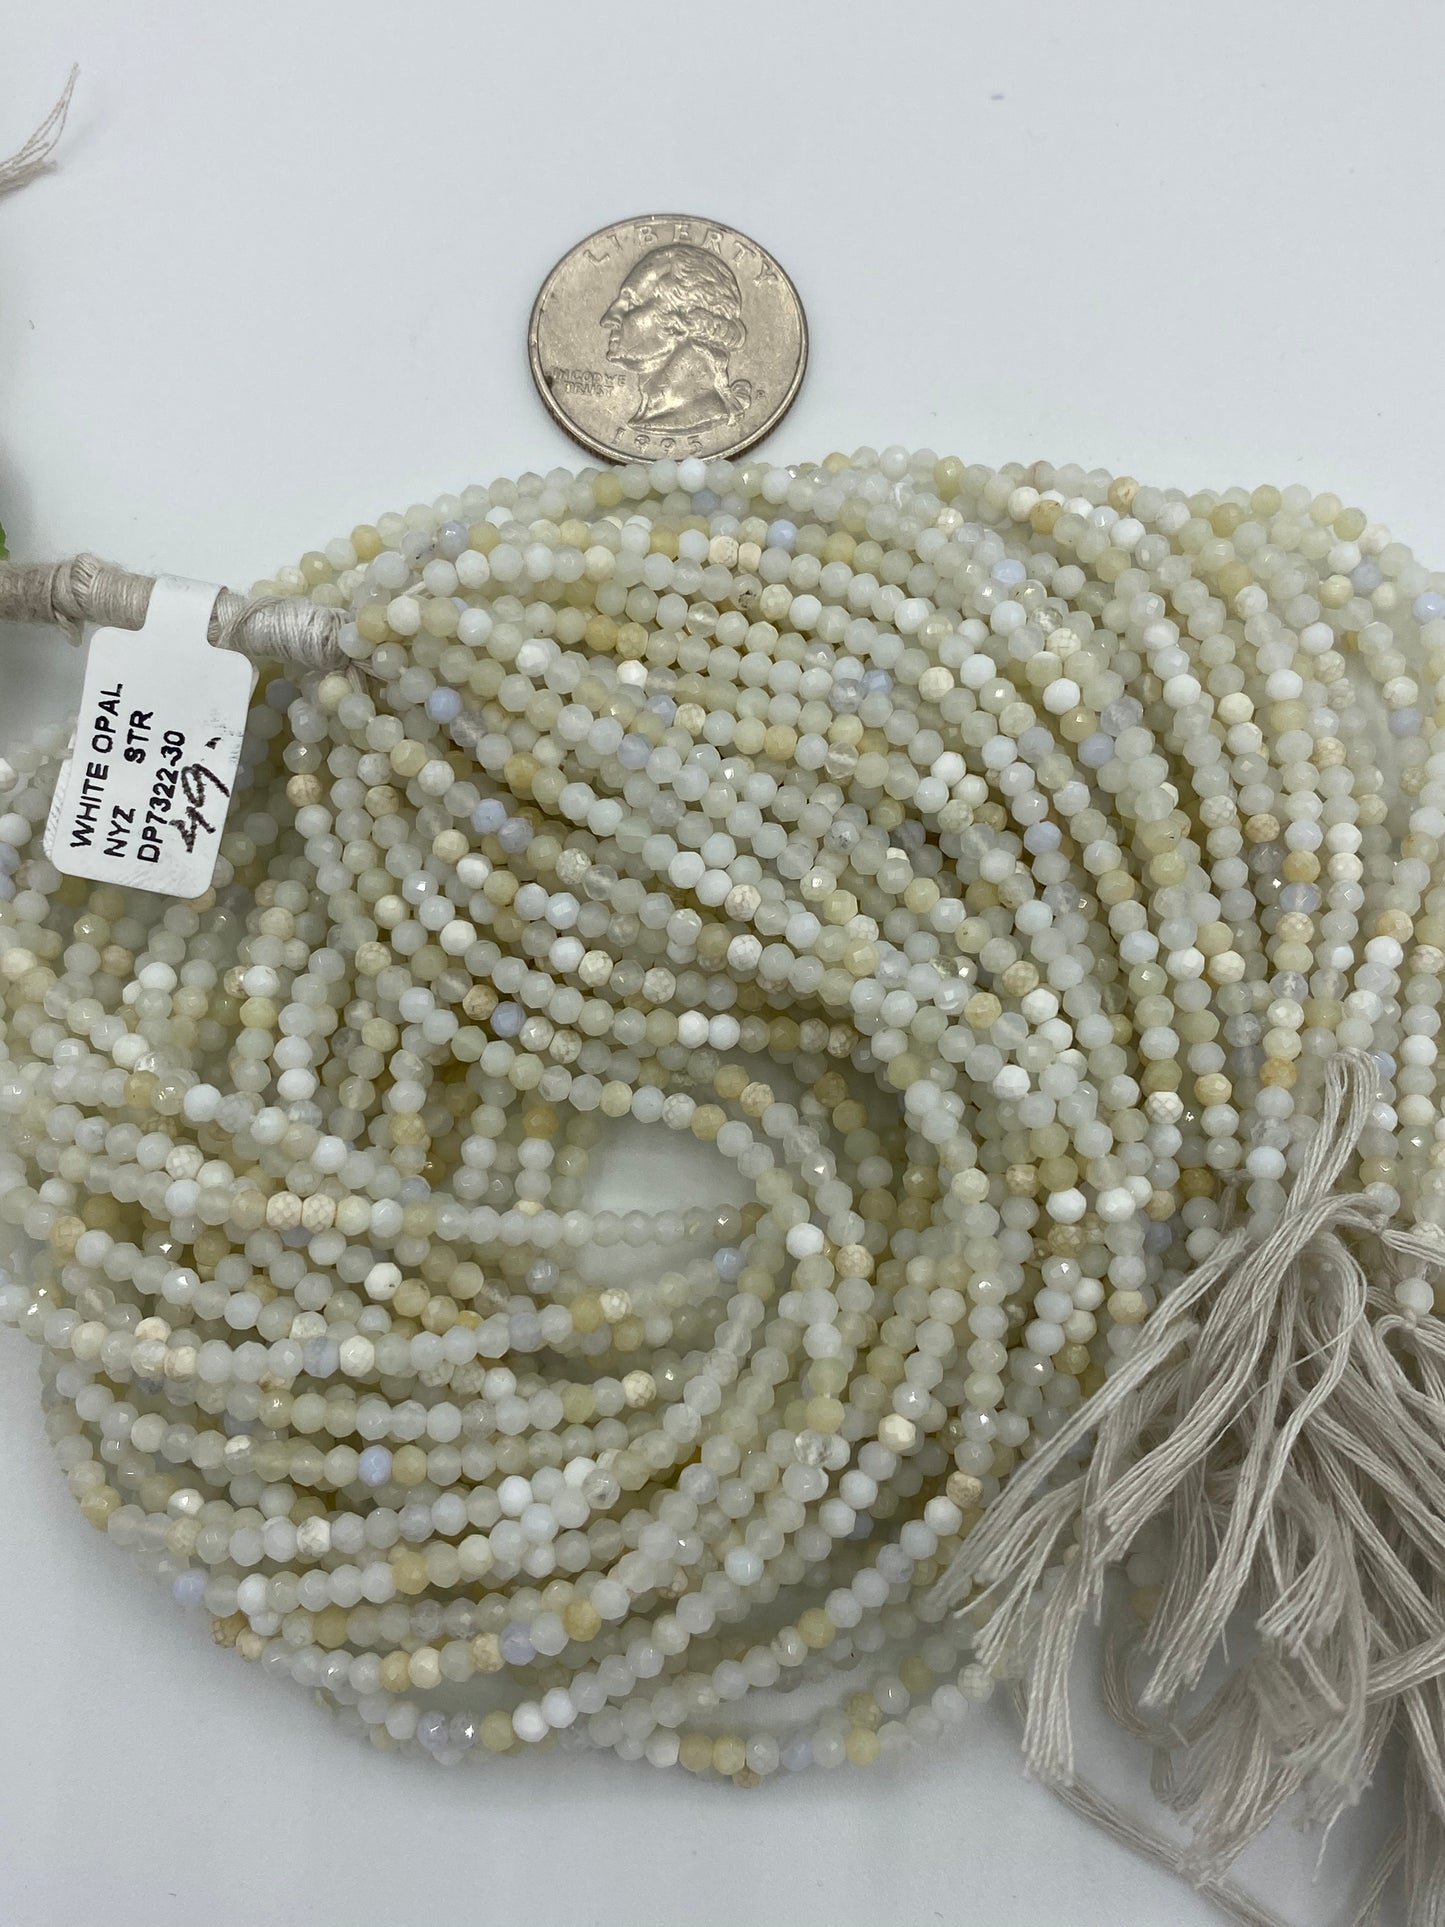 WHITE OPAL BEADS ROUND FACETED 3-4MM